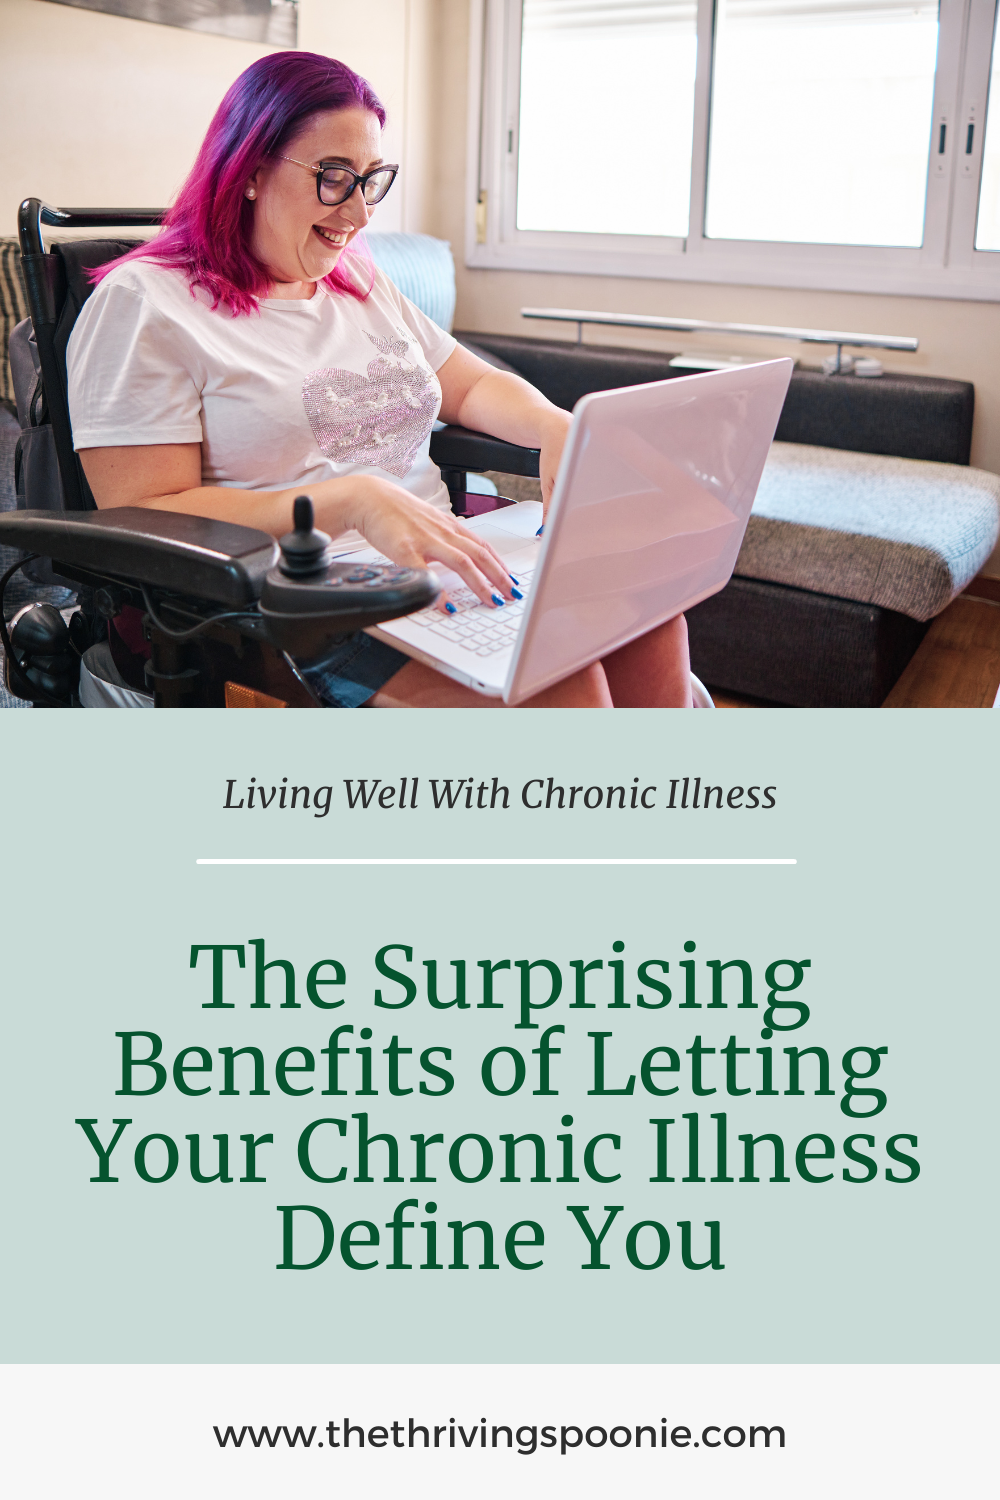 Pinterest Image for Blog Post Titled: The Surprising Benefits of Letting Your Chronic Illness Define You